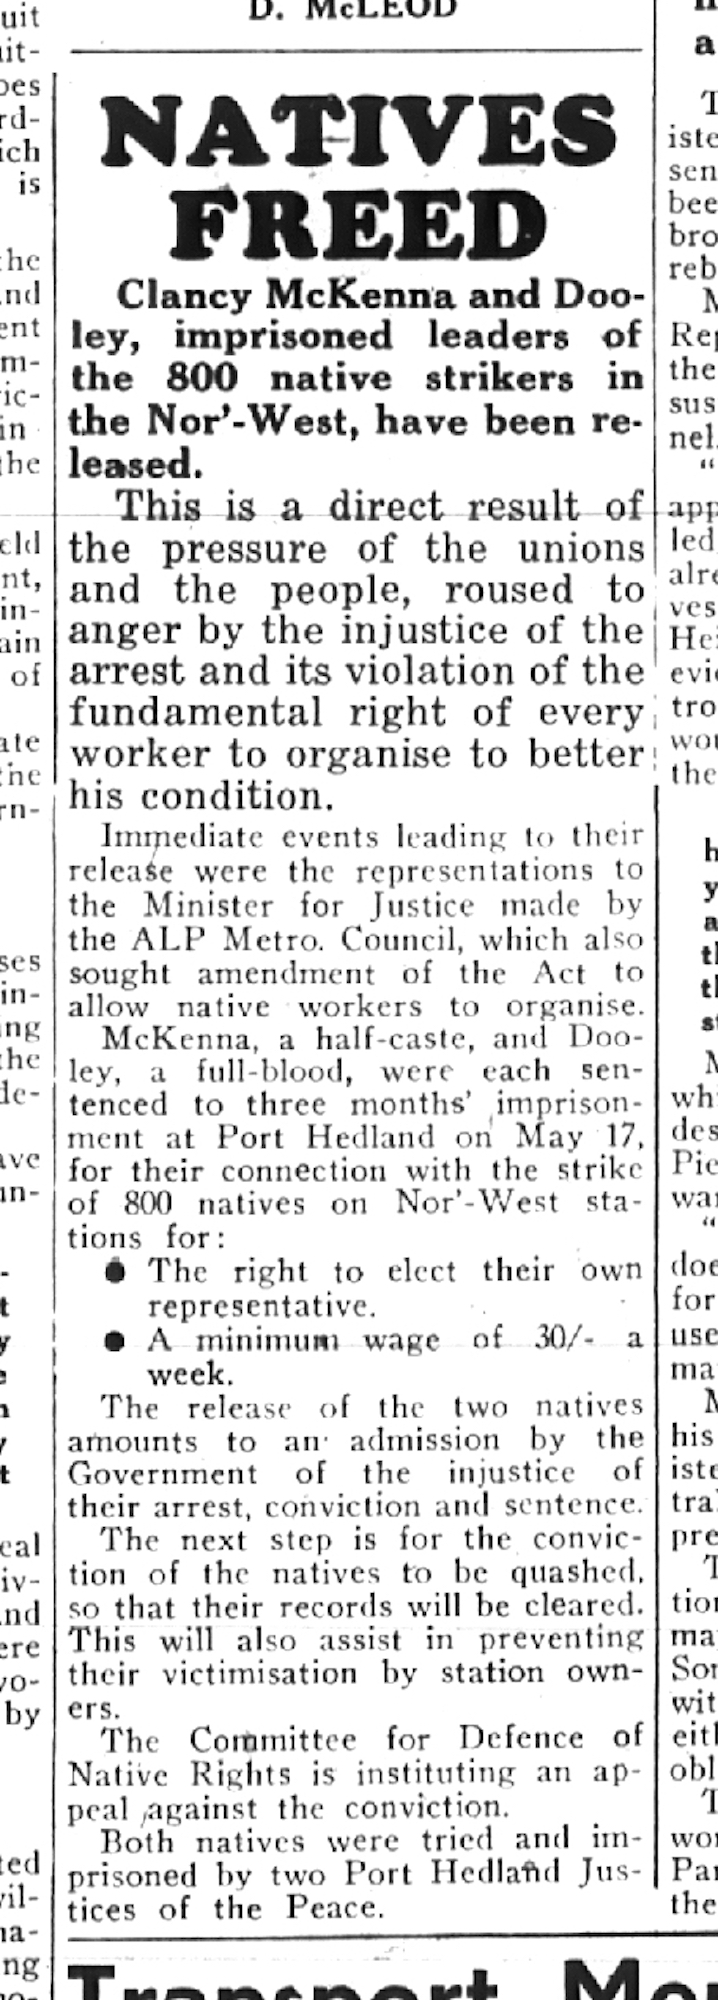 Workers’ Star, 28 June 1946, p. 1, ‘Natives Freed’